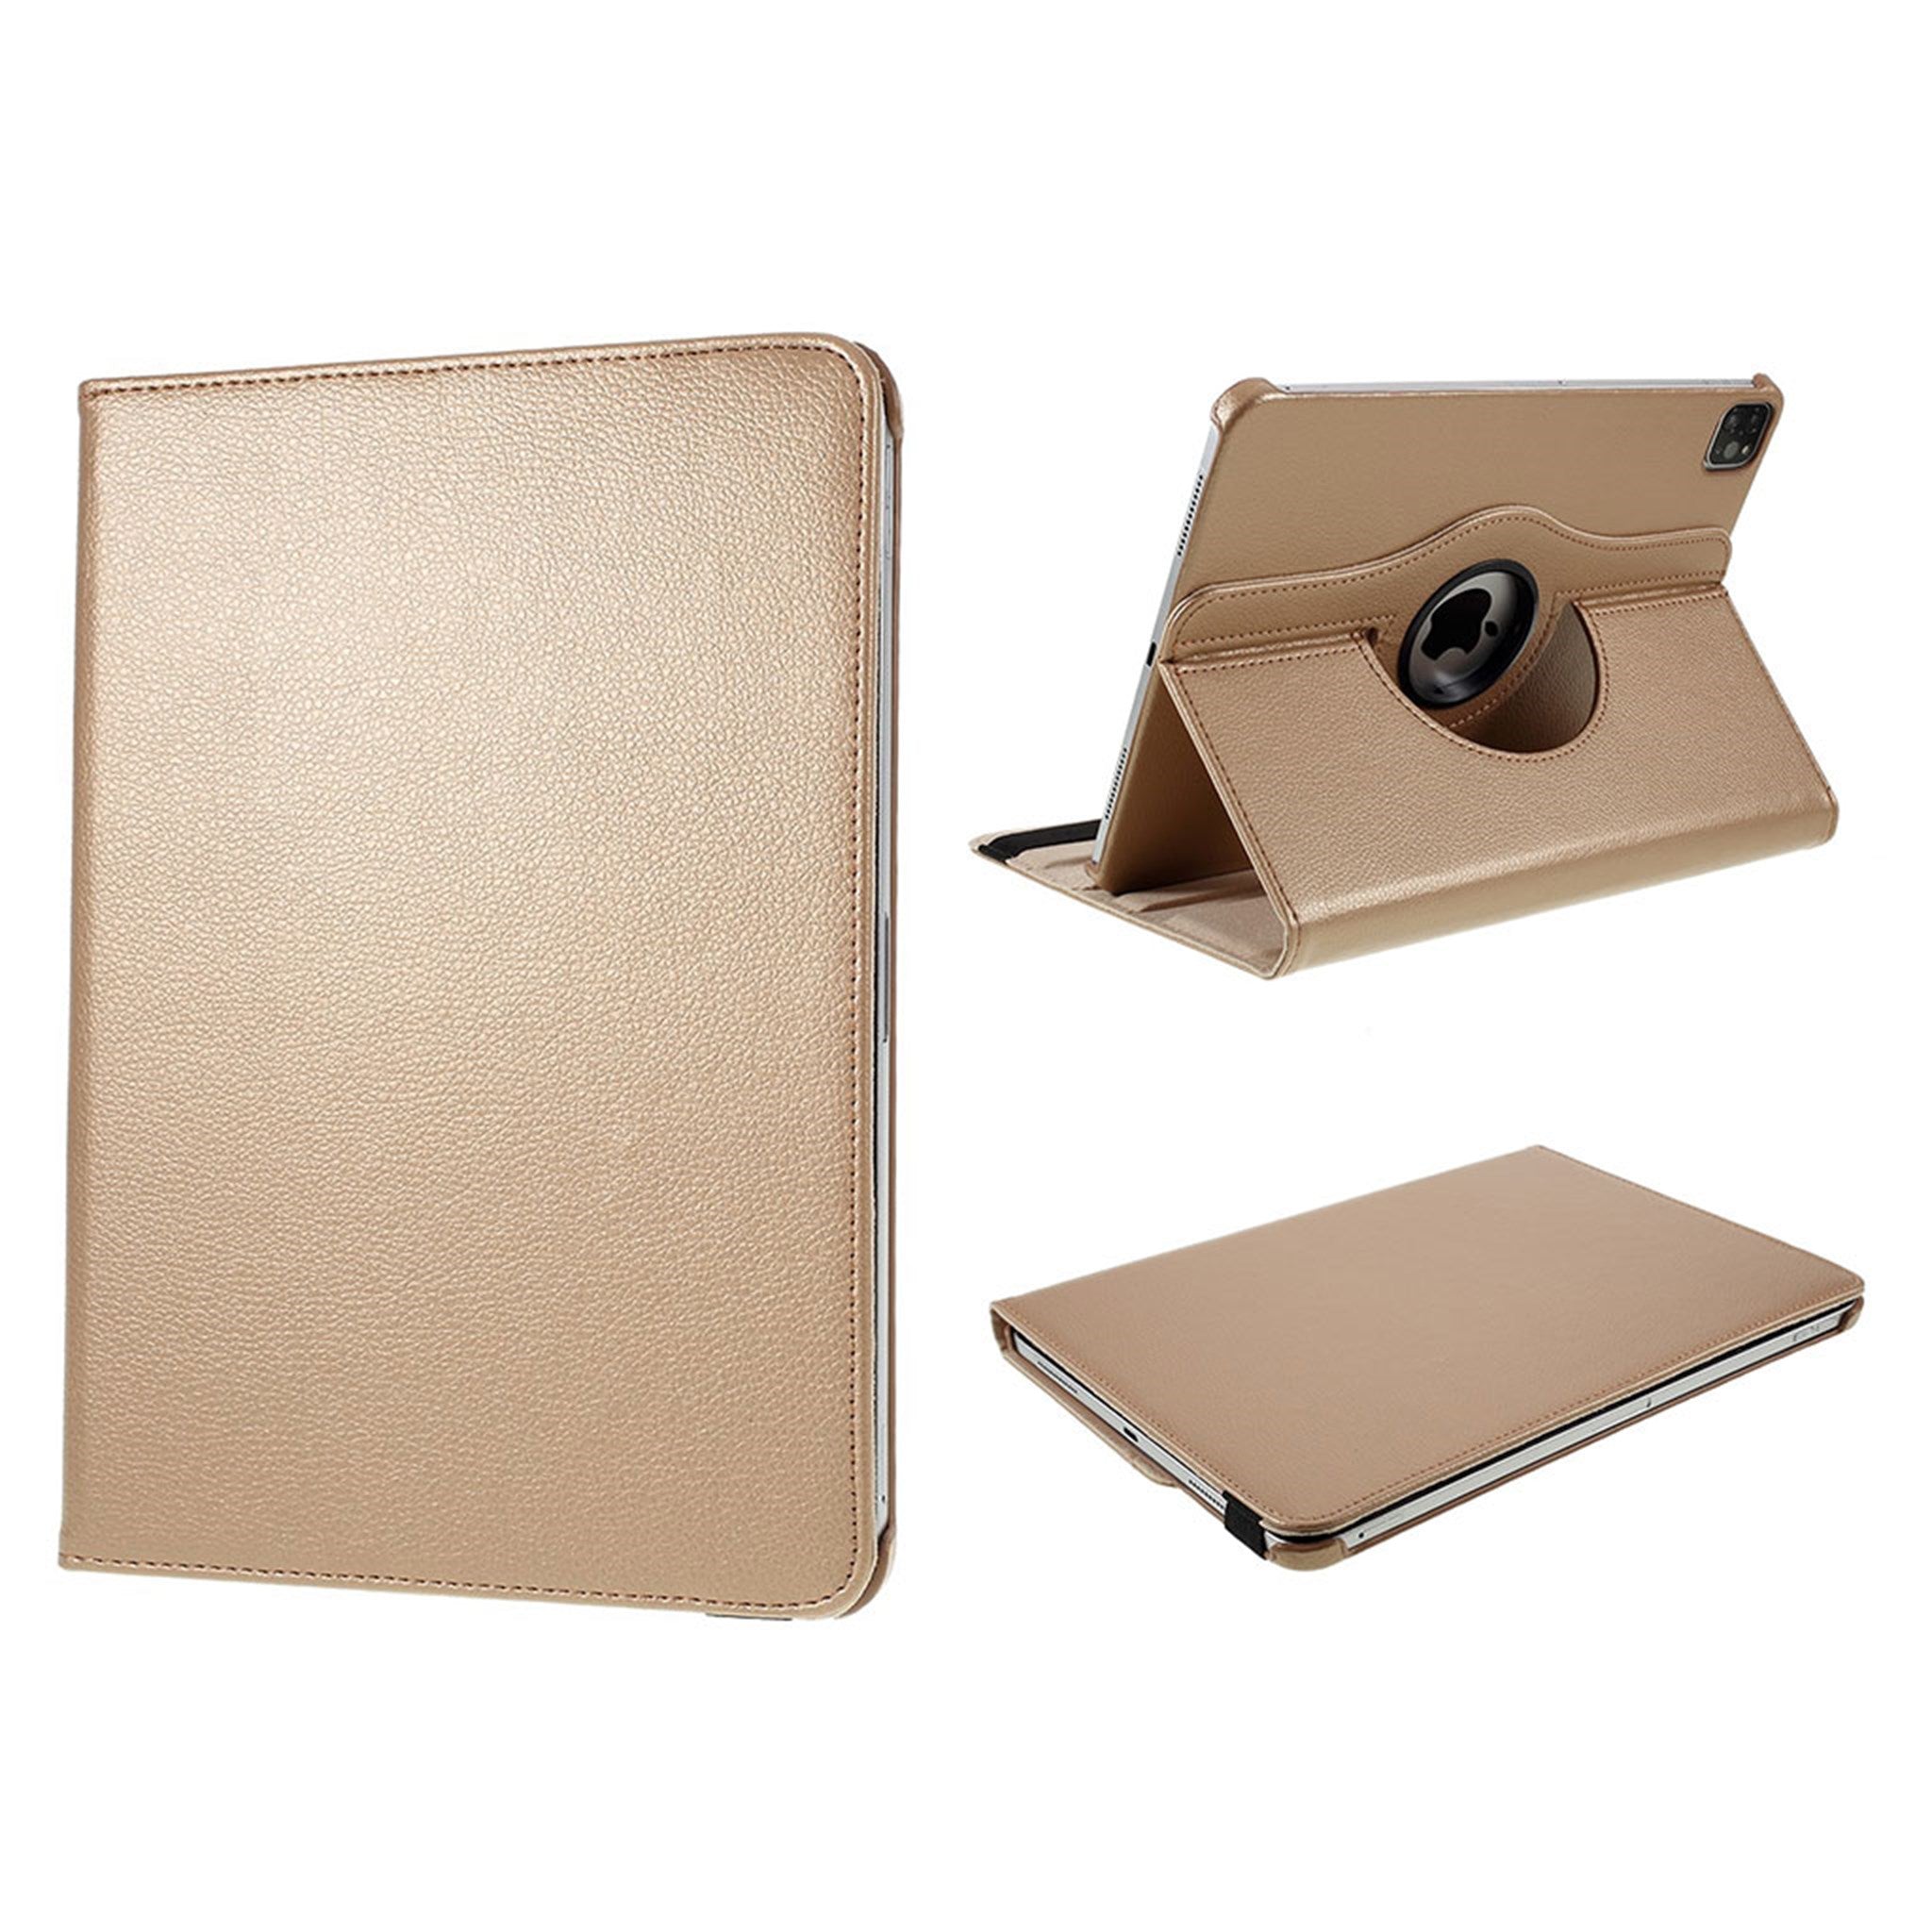 iPad Air (2020) 360 degree rotatable leather case - Gold